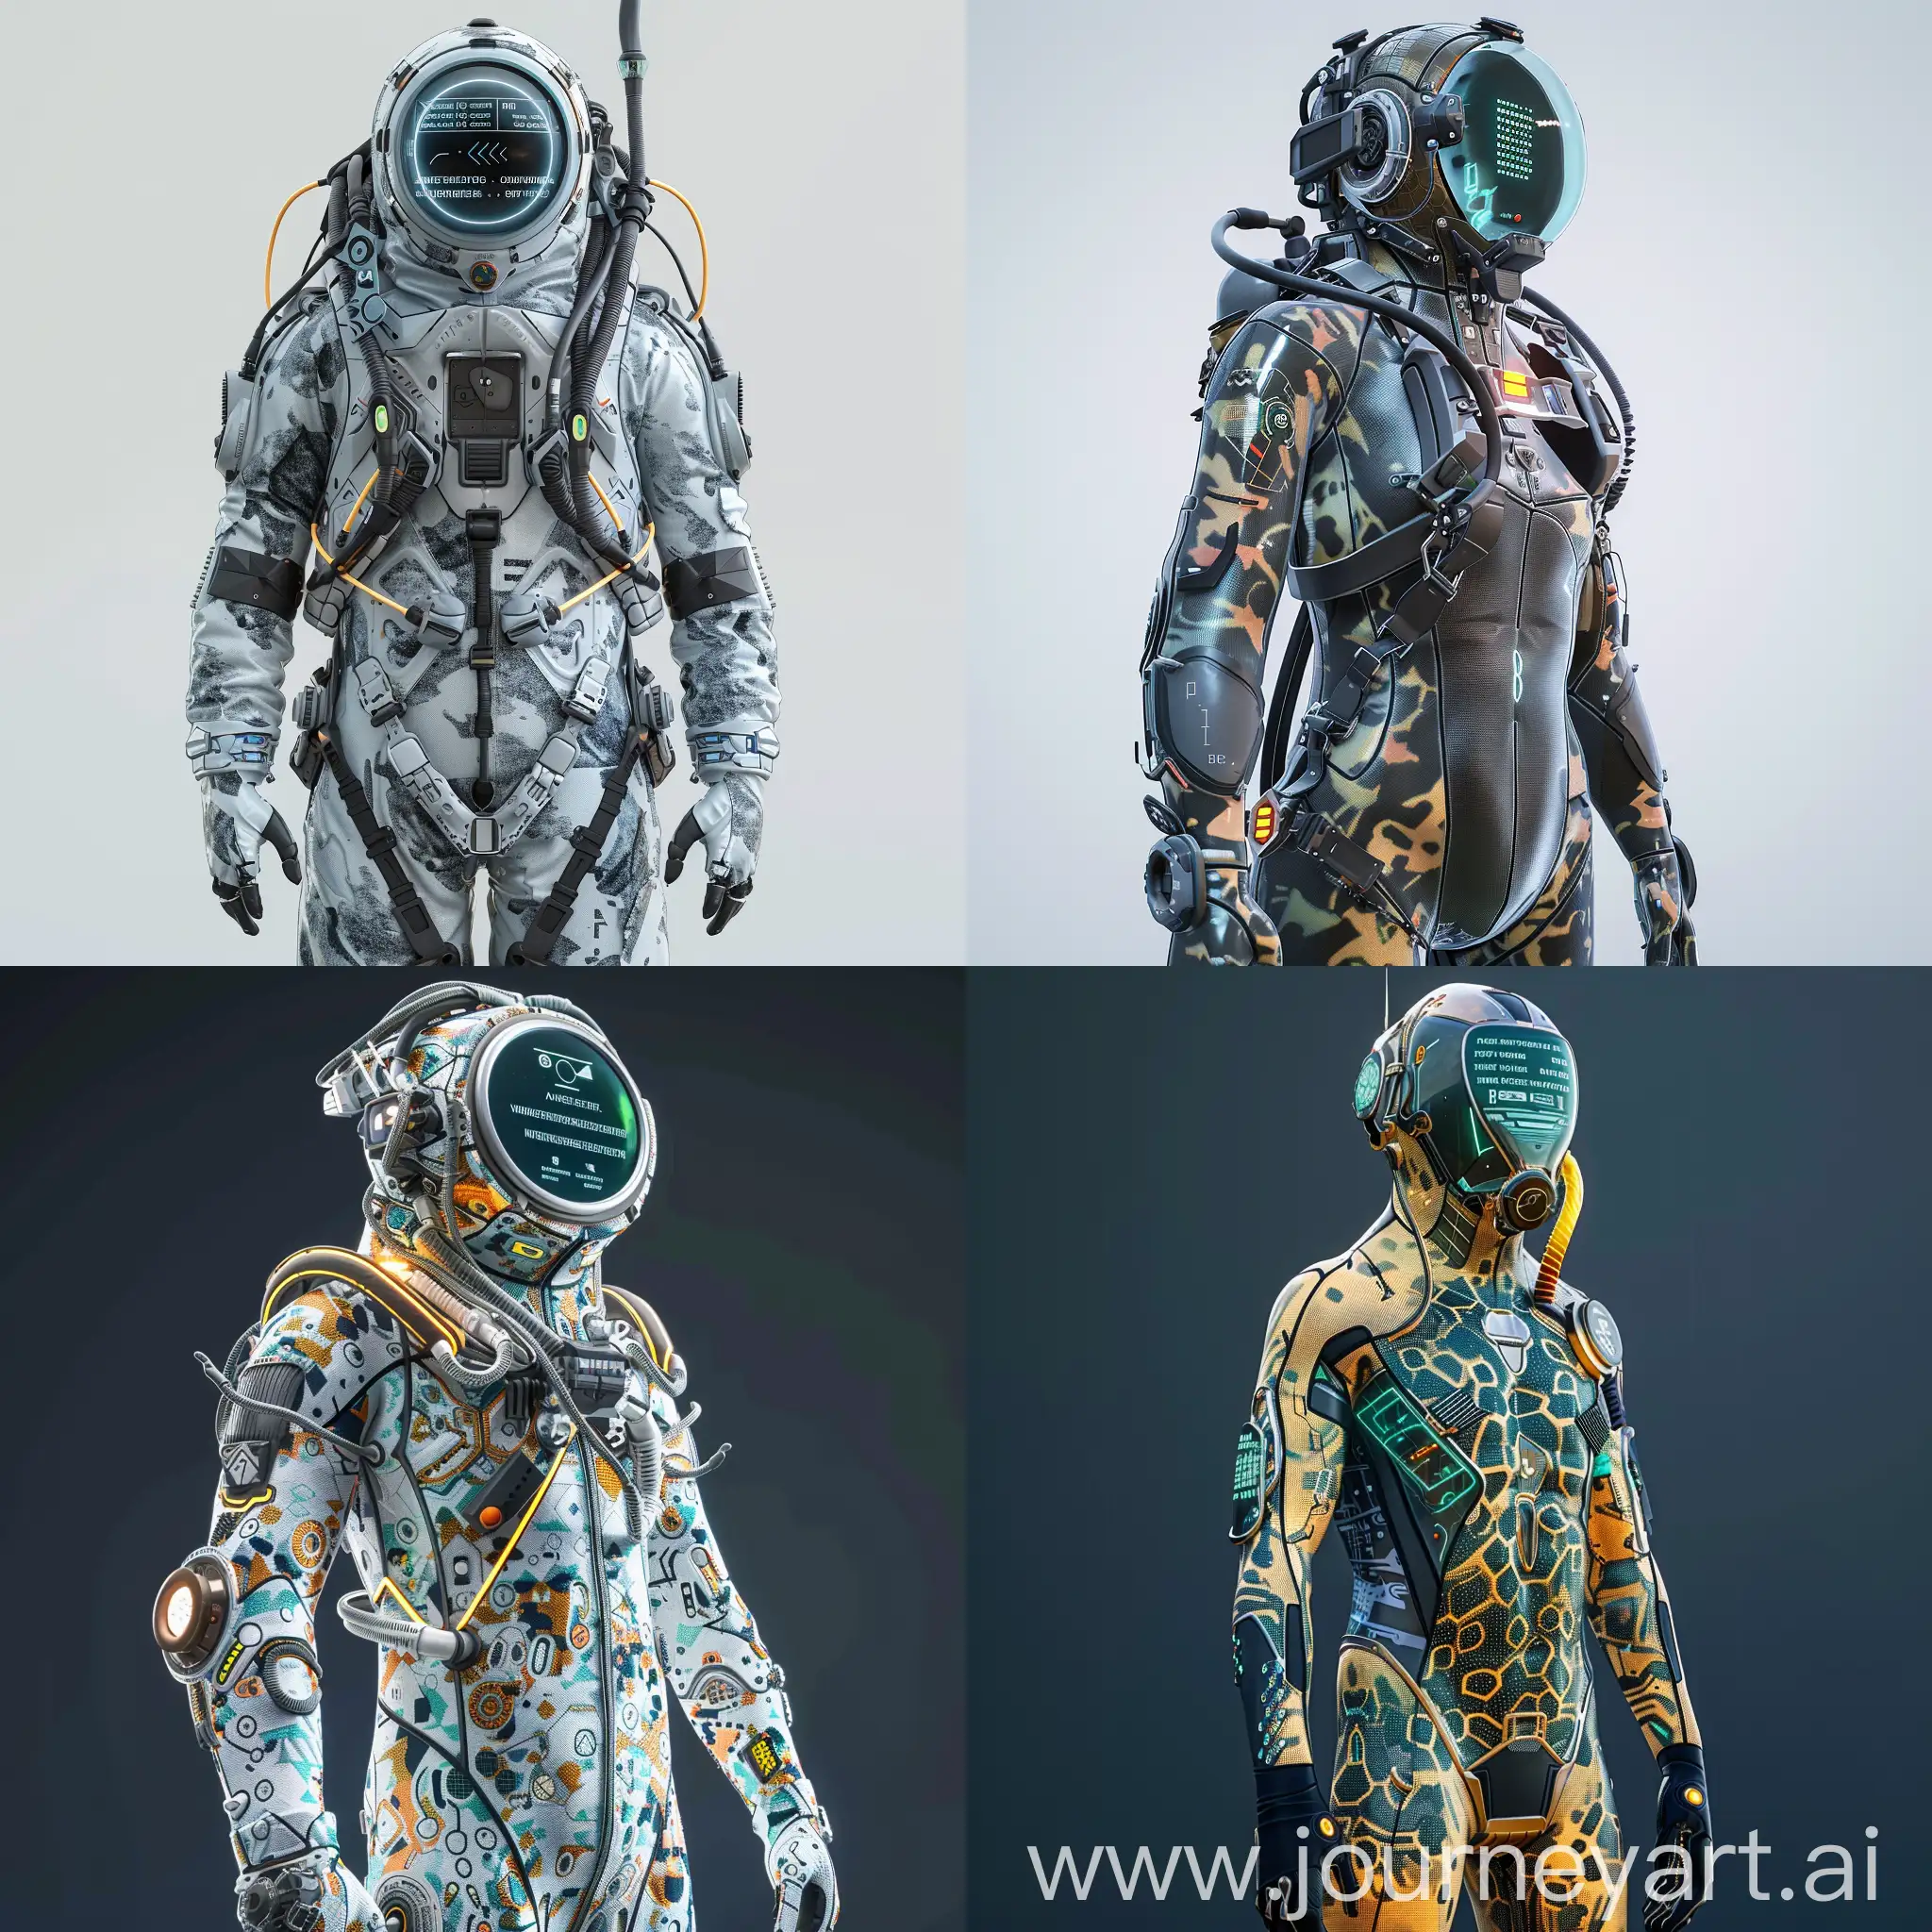 Imaginative futuristic diver's costume, Integrated Heads-Up Display (HUD), Nanomaterial Fabric, Thermal Regulation System, Hydrophobic Coating, Oxygen Recycling System, AI-Assisted Navigation, Biometric Monitoring, Power-Assisted Mobility, Wireless Communication System, Modular Component Integration, Cloud Data Syncing, Social Media Connectivity, Information Encryption, Big Data Analytics, Machine Learning Algorithms, Haptic Feedback System, Remote Operability, Virtual Reality Training Modules, User Interface Customization, Cybersecurity Measures, Adaptive Camouflage Skin, Solar Panel Scales, Water Jet Propulsion, Multi-Tool Appendages, Sensory Enhancement Fins, Emergency Flotation Devices, LED Communication Signals, Reinforced Exoskeleton, Environmental Sampling Pods, Global Positioning Interface, Data Streaming Fins, Blockchain-Enabled Identification, IoT Connectivity, Augmented Reality Visor, Peer-to-Peer Network Nodes, Crowdsourced Navigation Maps, Wireless Charging Stations, Open-Source Hardware Interfaces, Cyber-Physical System Integration, unreal engine 5 --stylize 1000